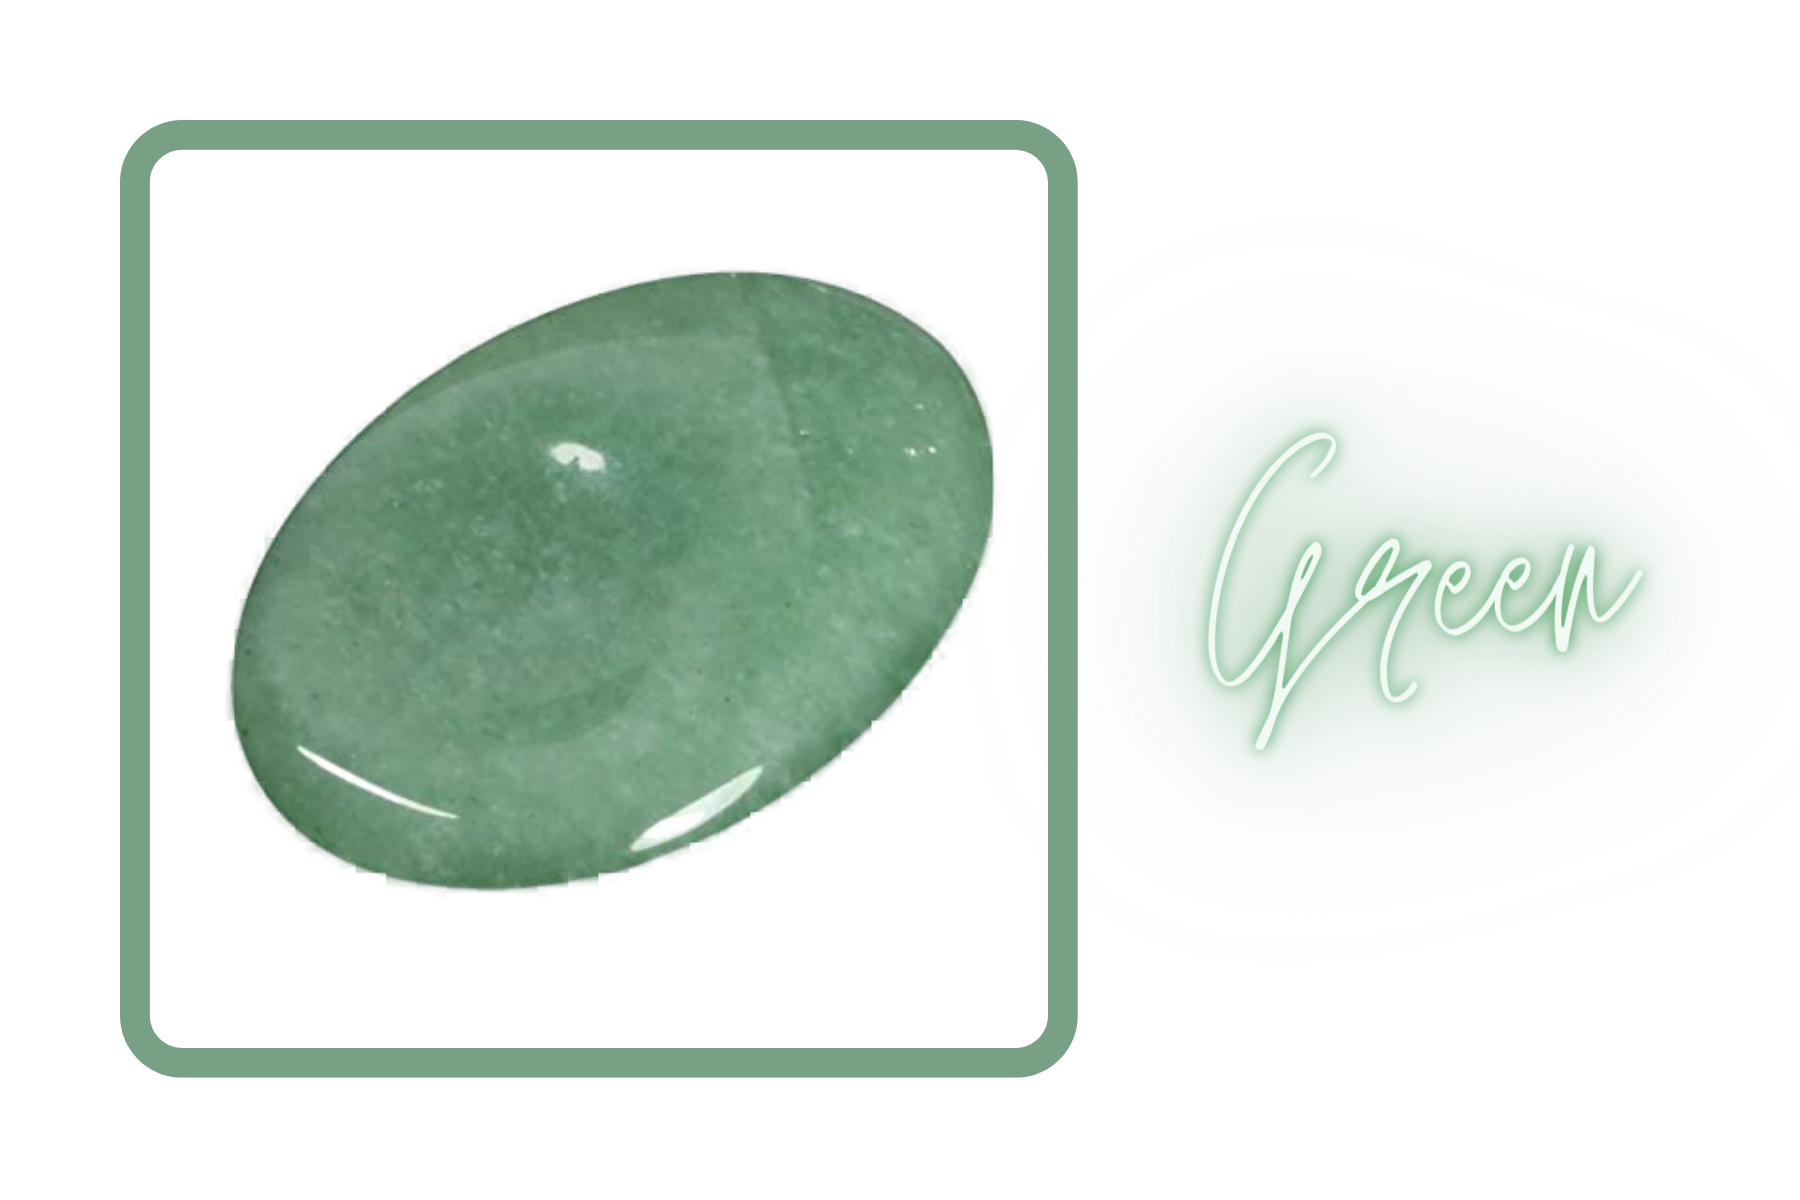 Green Aventurine stone on a green box with the word "green" and a green light effect